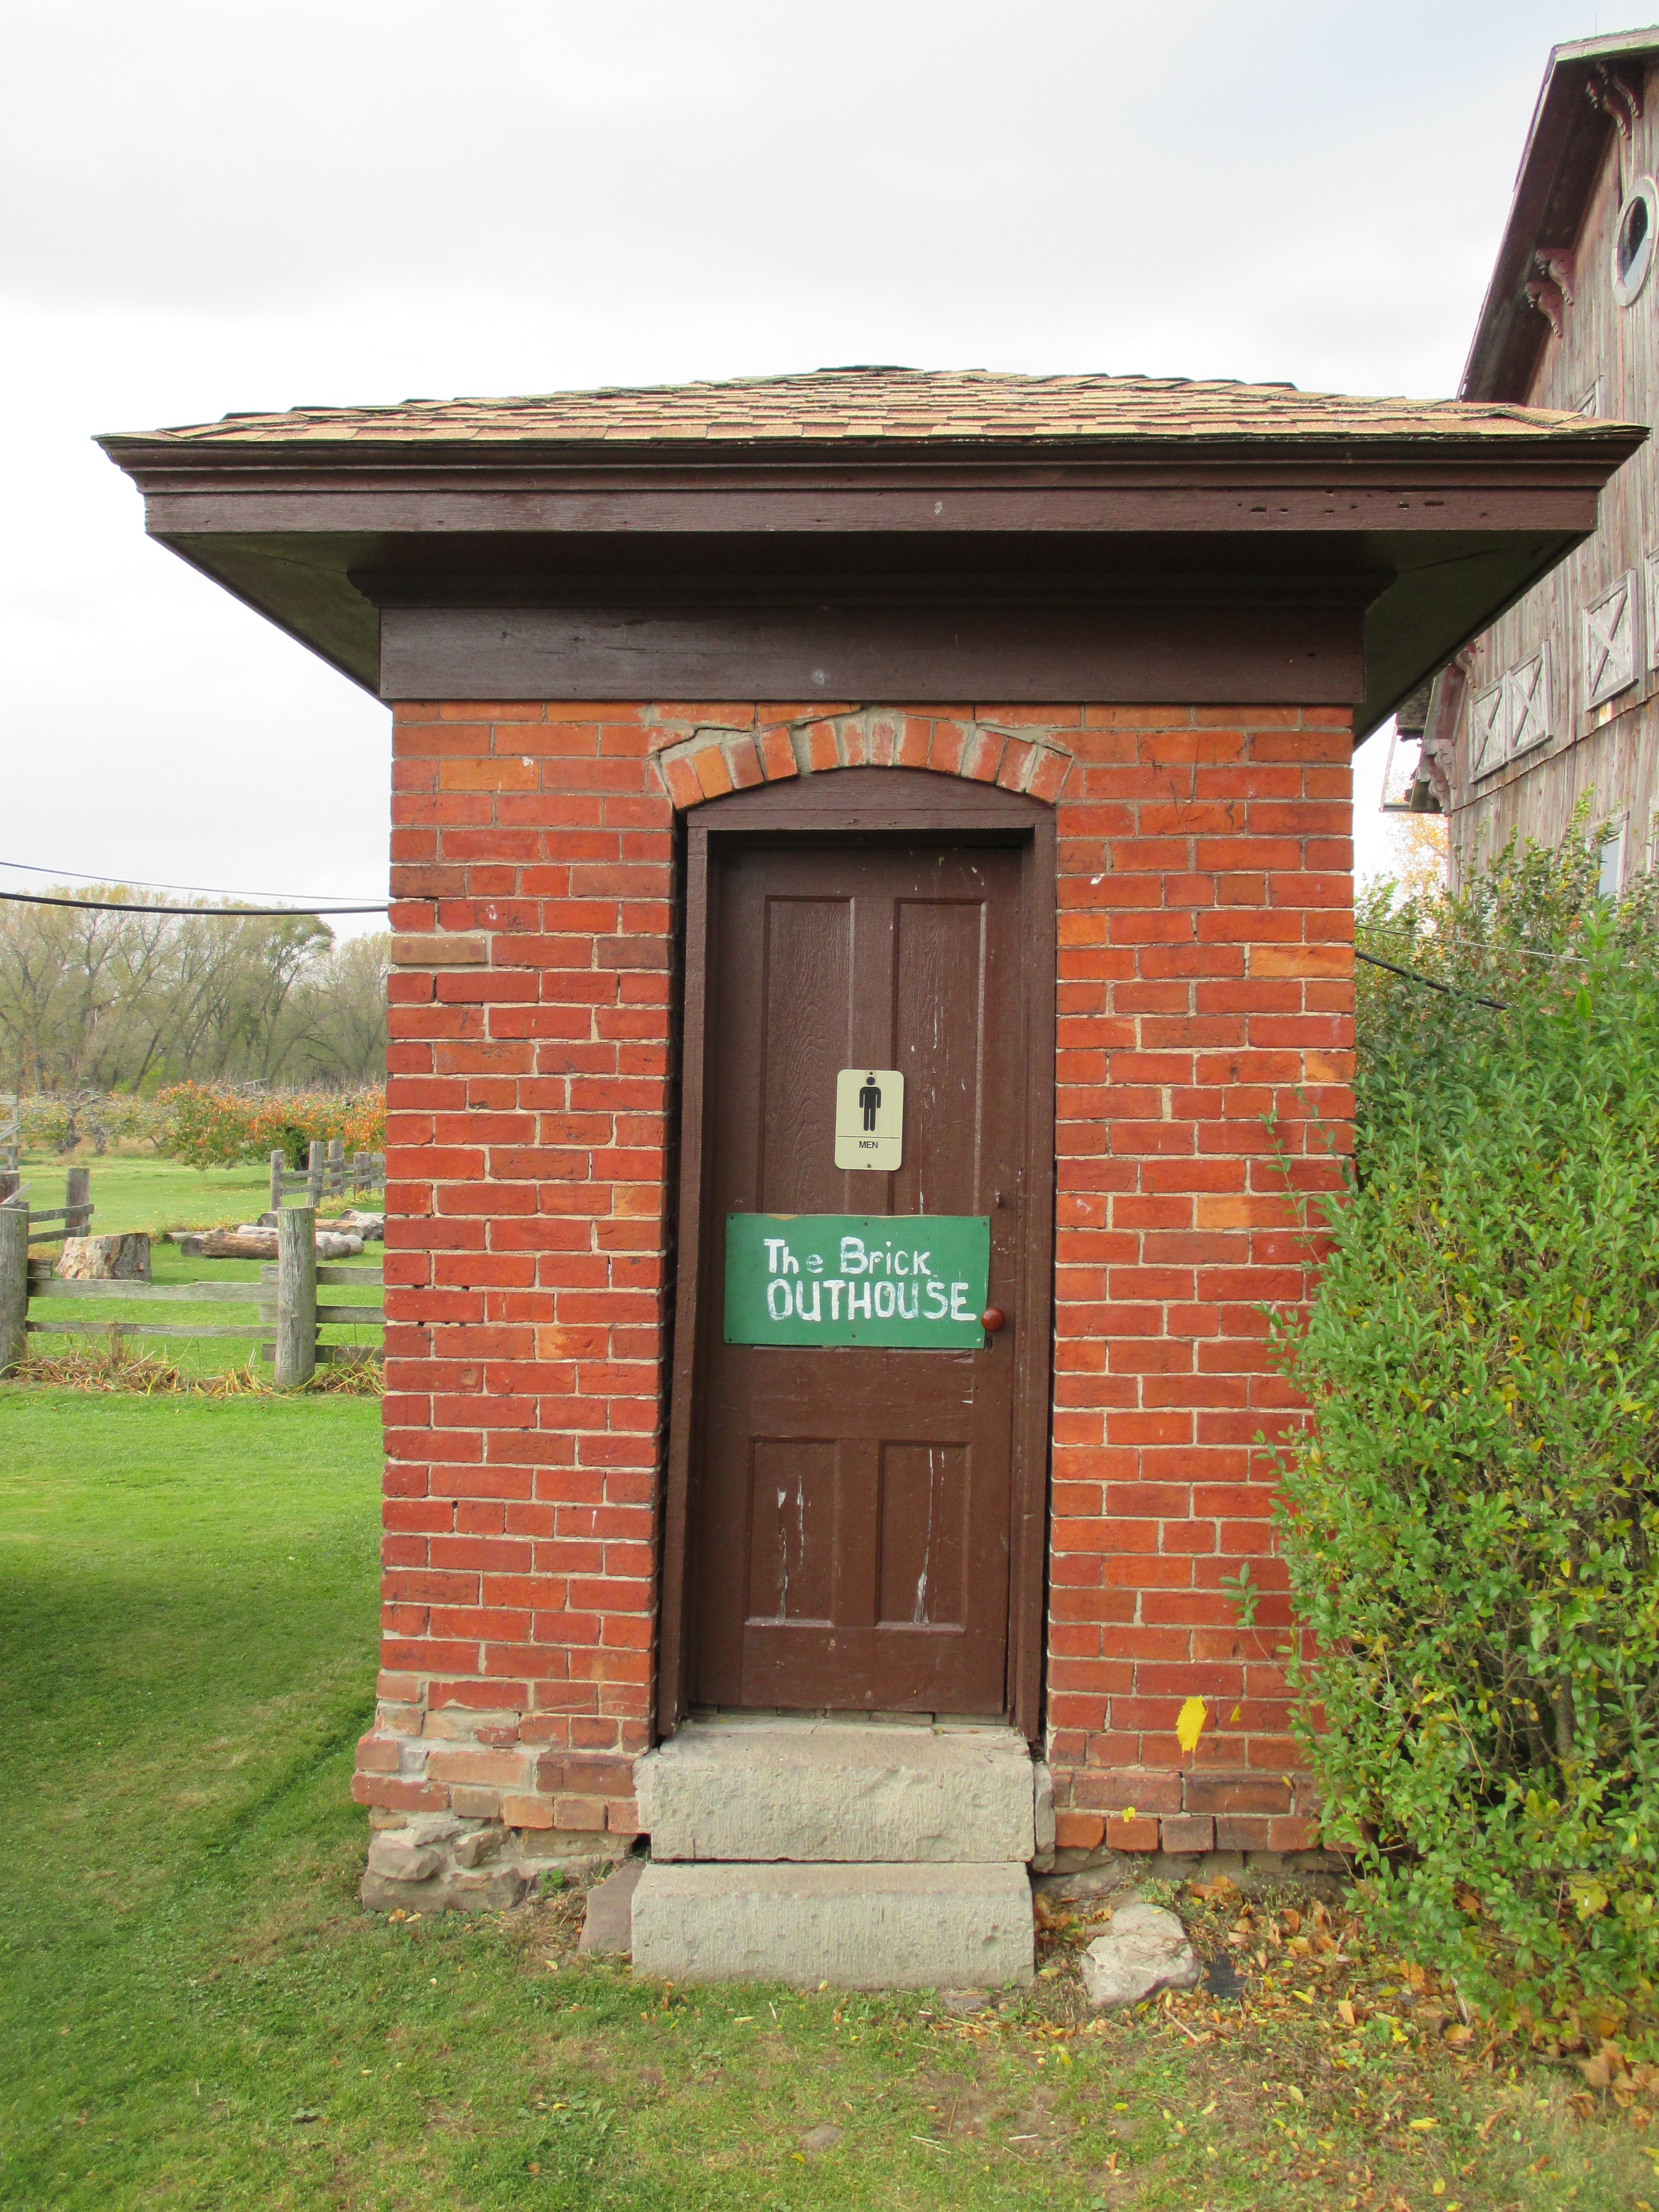 The Brick Outhouse